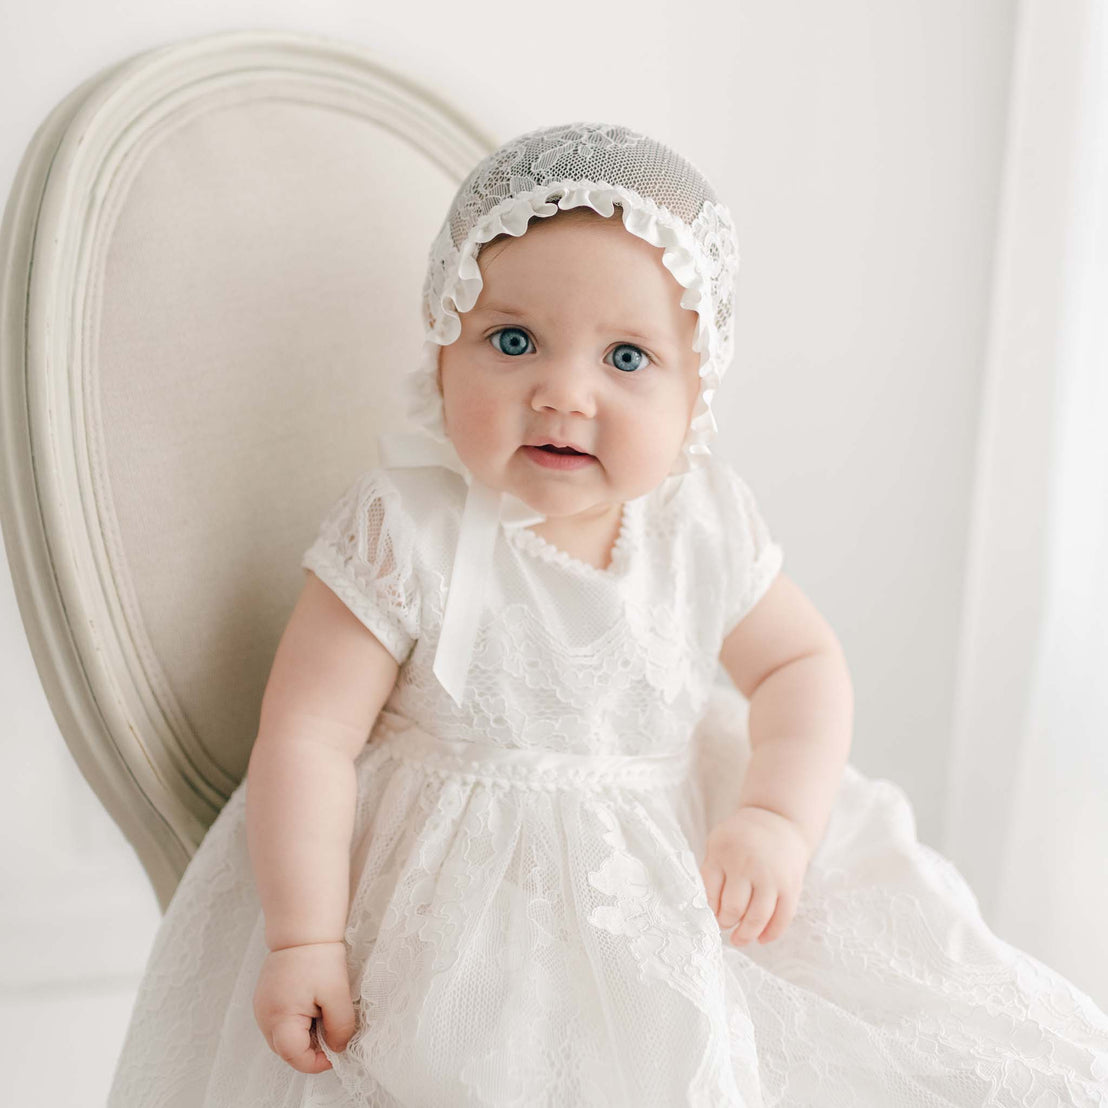 A baby wearing the Victoria Puff Sleeve Christening Gown and Bonnet sits on a light-colored, upholstered chair. The baby has blue eyes and a slight smile.